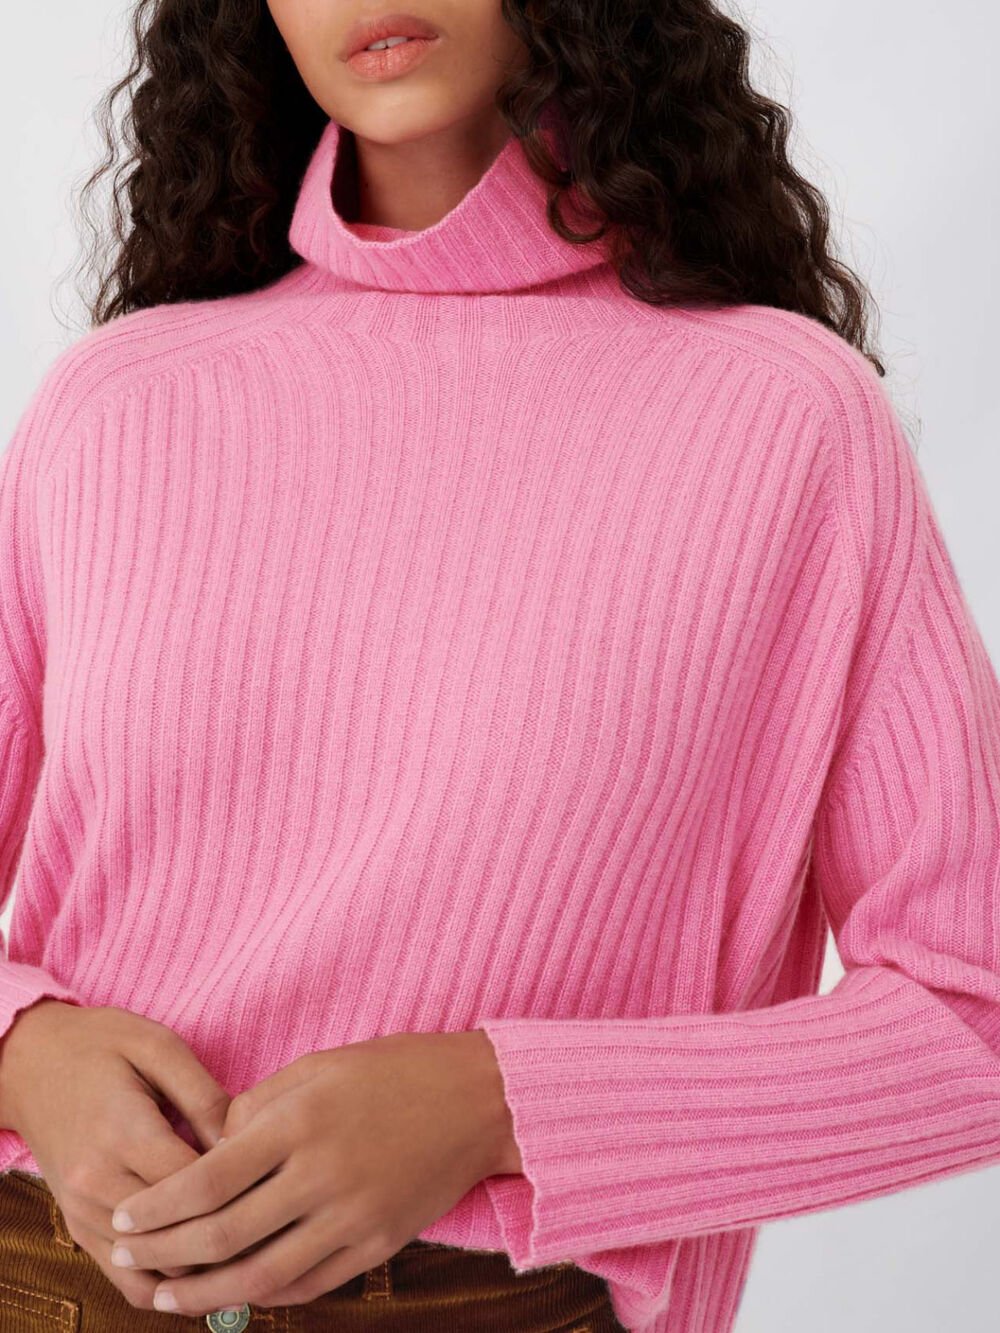 120MADINETTE High neck cashmere sweater - All the collection - Maje.com